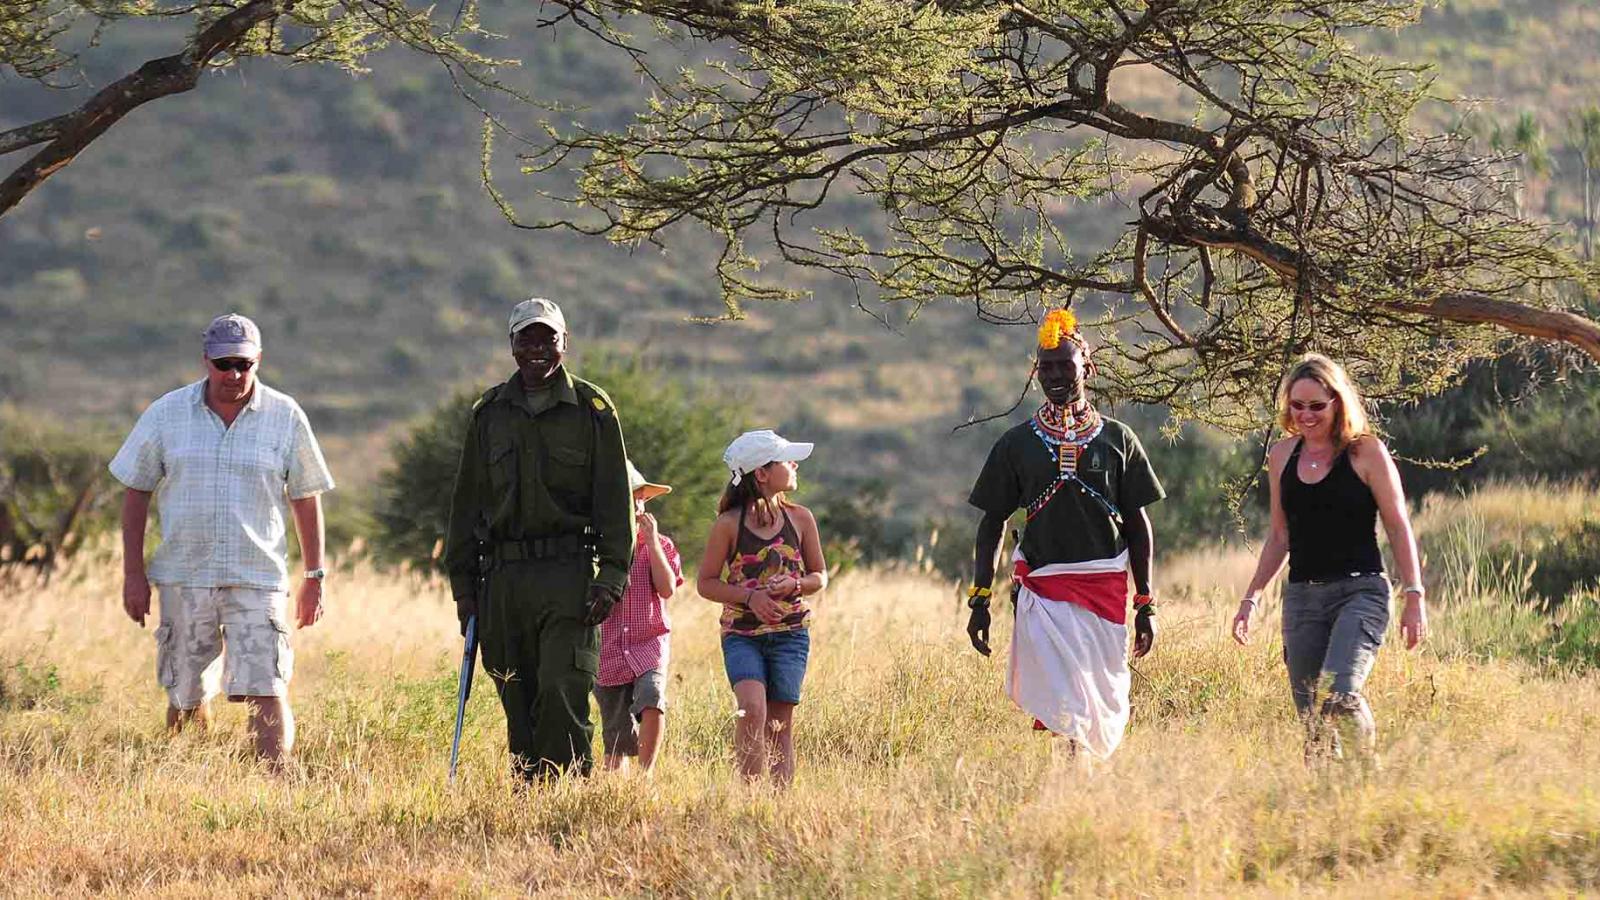 How to explore Kenya with your family